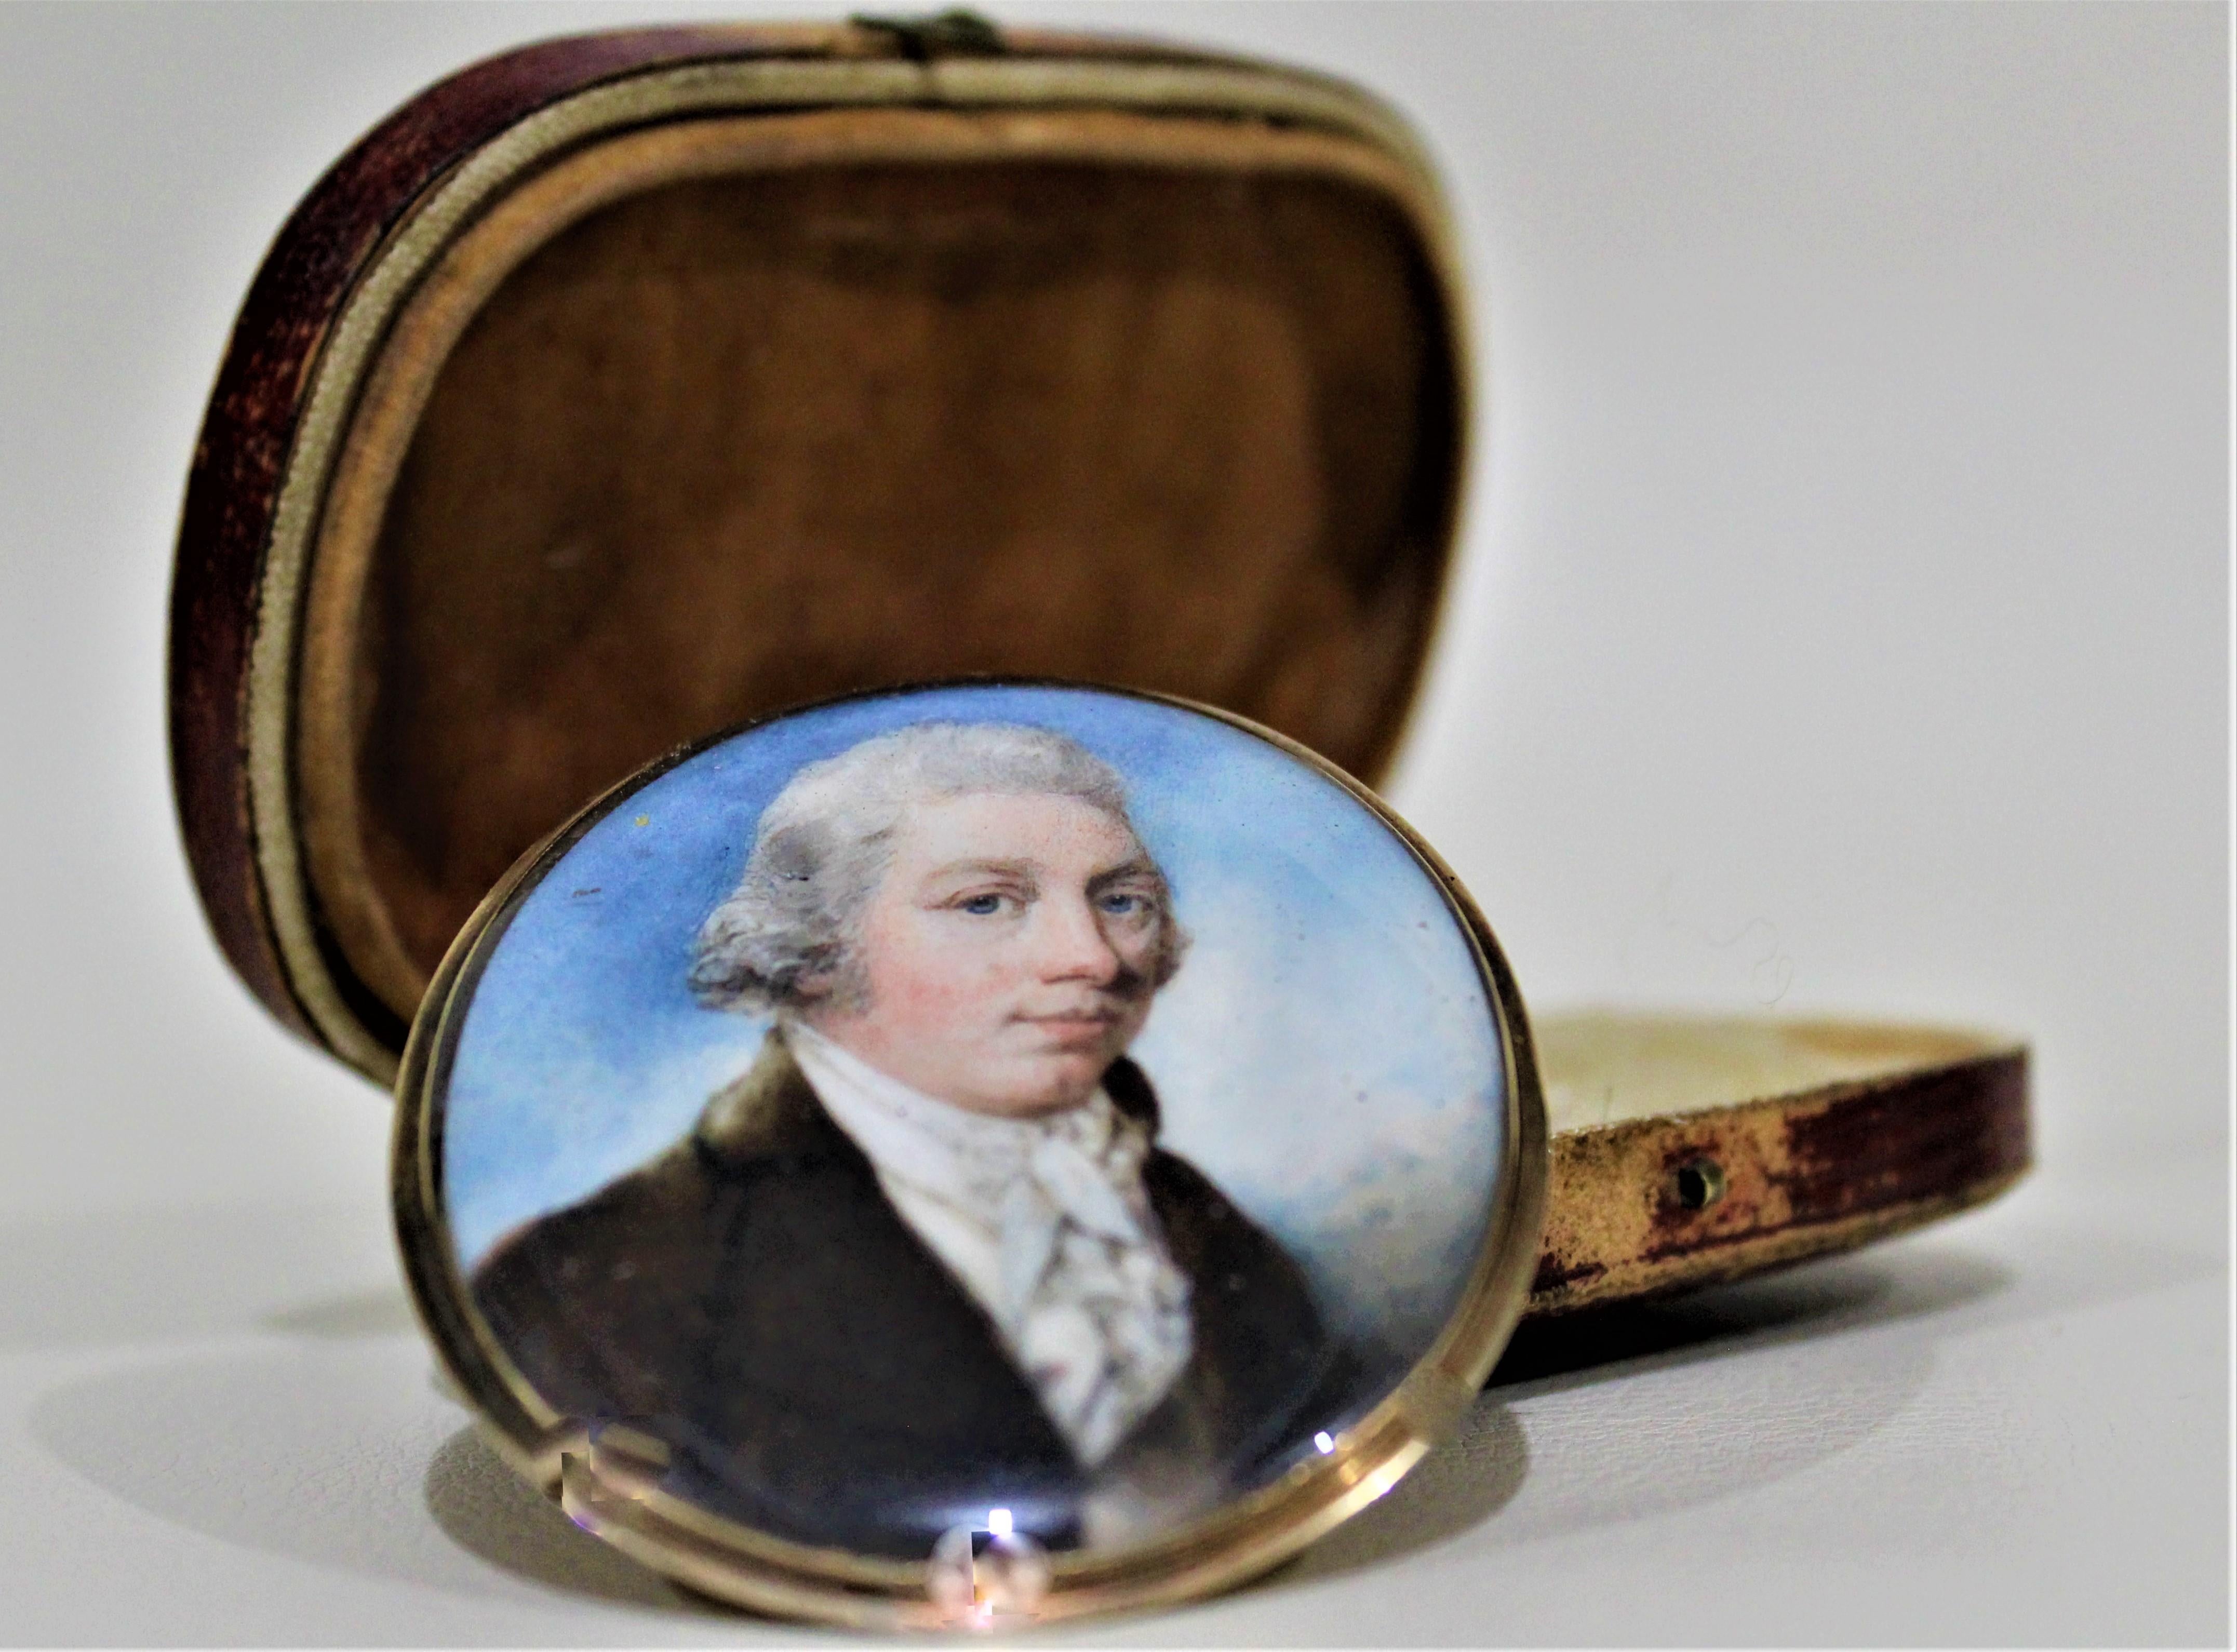 Metalwork Antique Miniature Portrait on Bone with Fitted Case 14-Karat Yellow Gold Brooch For Sale